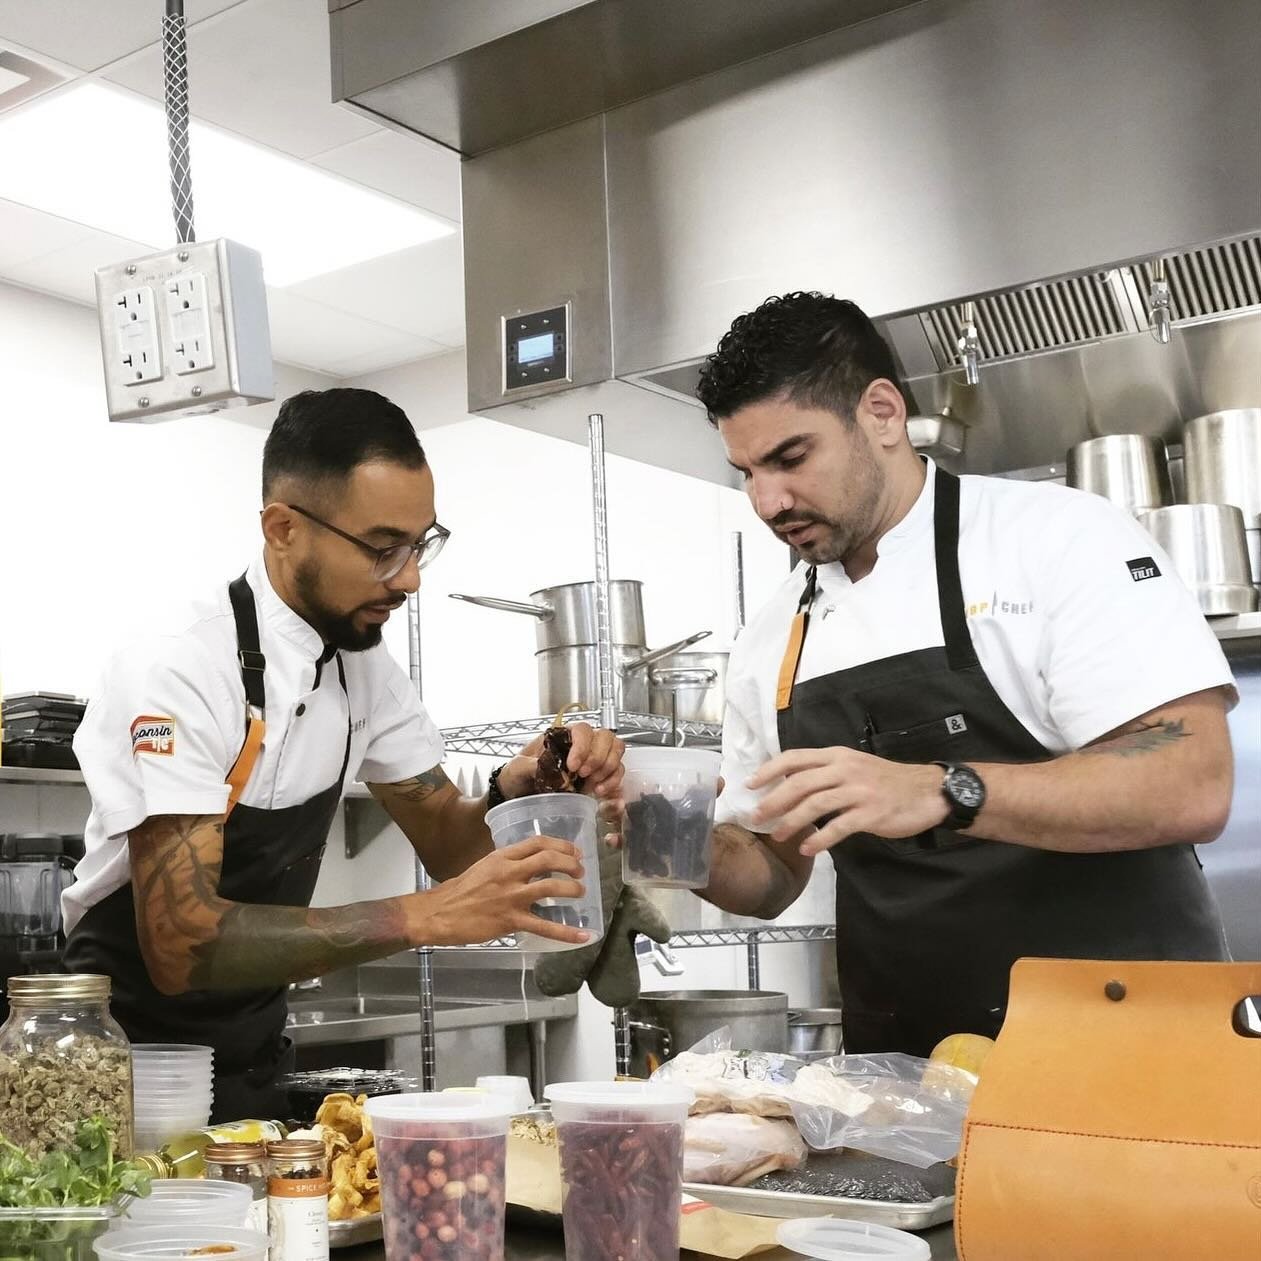 This week we&rsquo;re #TalkingMole with @chef.dannygarcia 

Tune in tonight for an all new episode @bravotopchef on @bravotv 🙌🎉